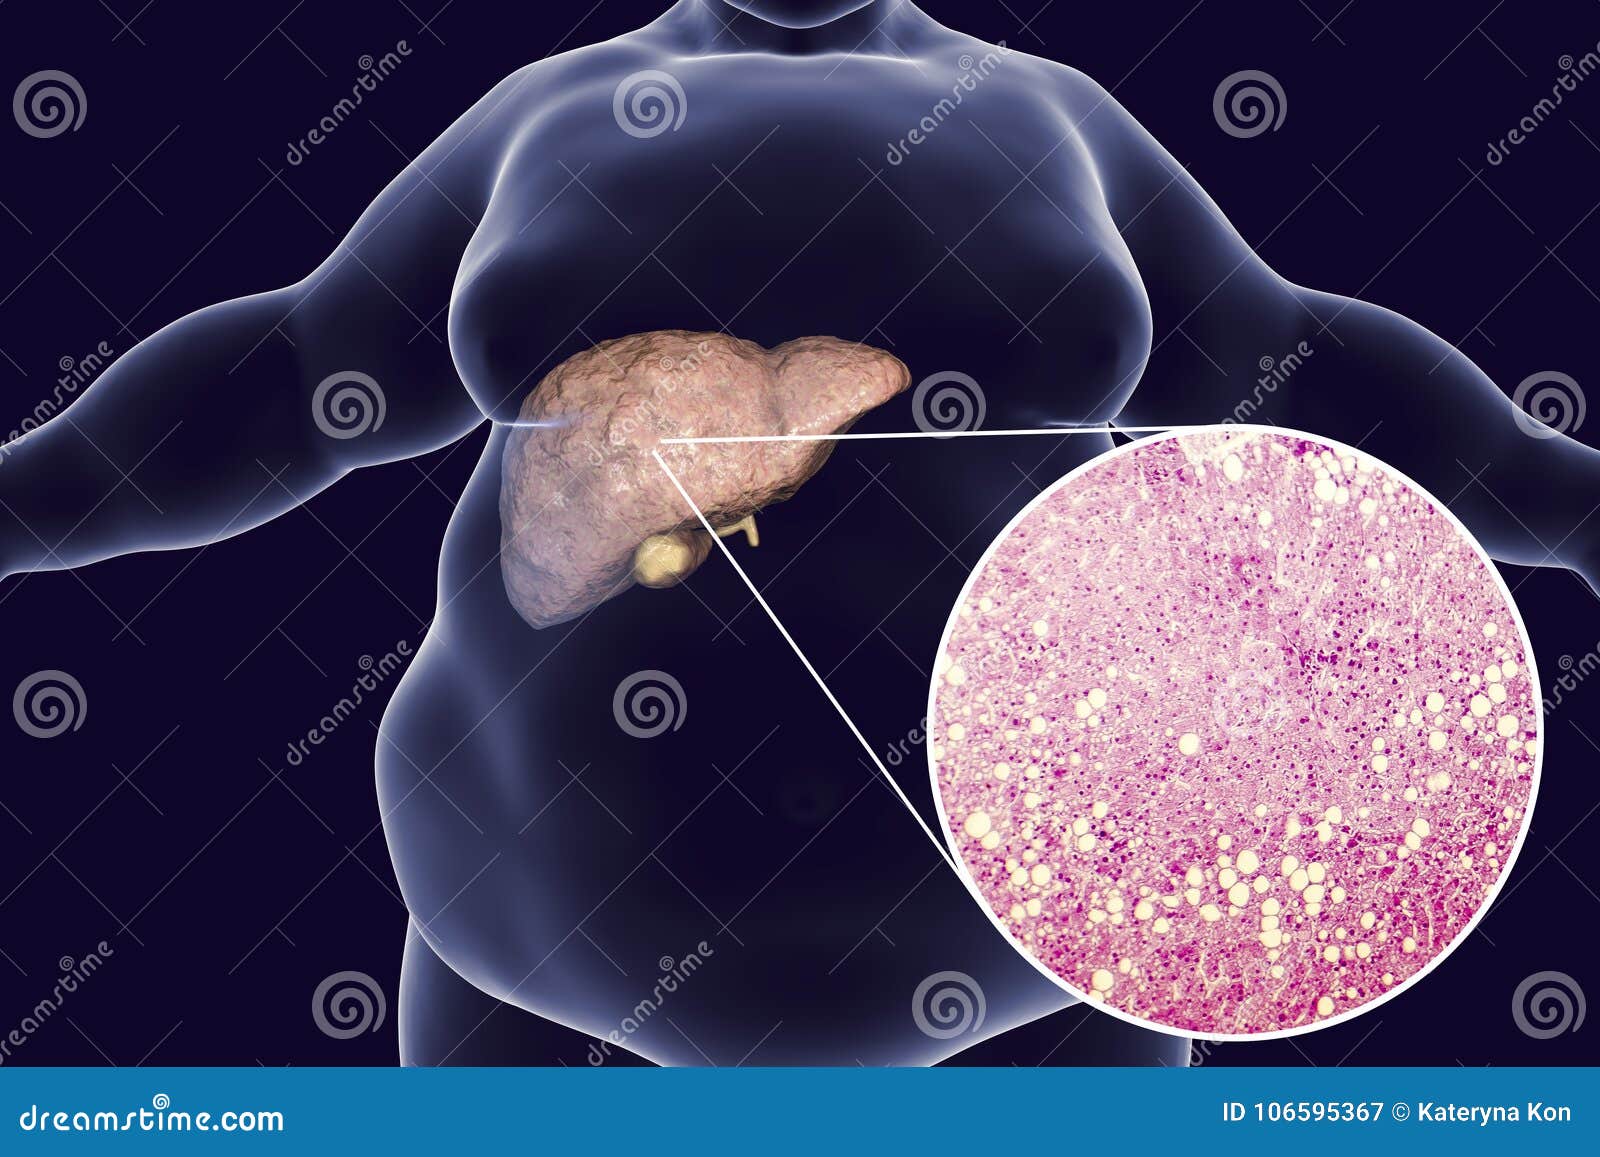 obese man with fatty liver